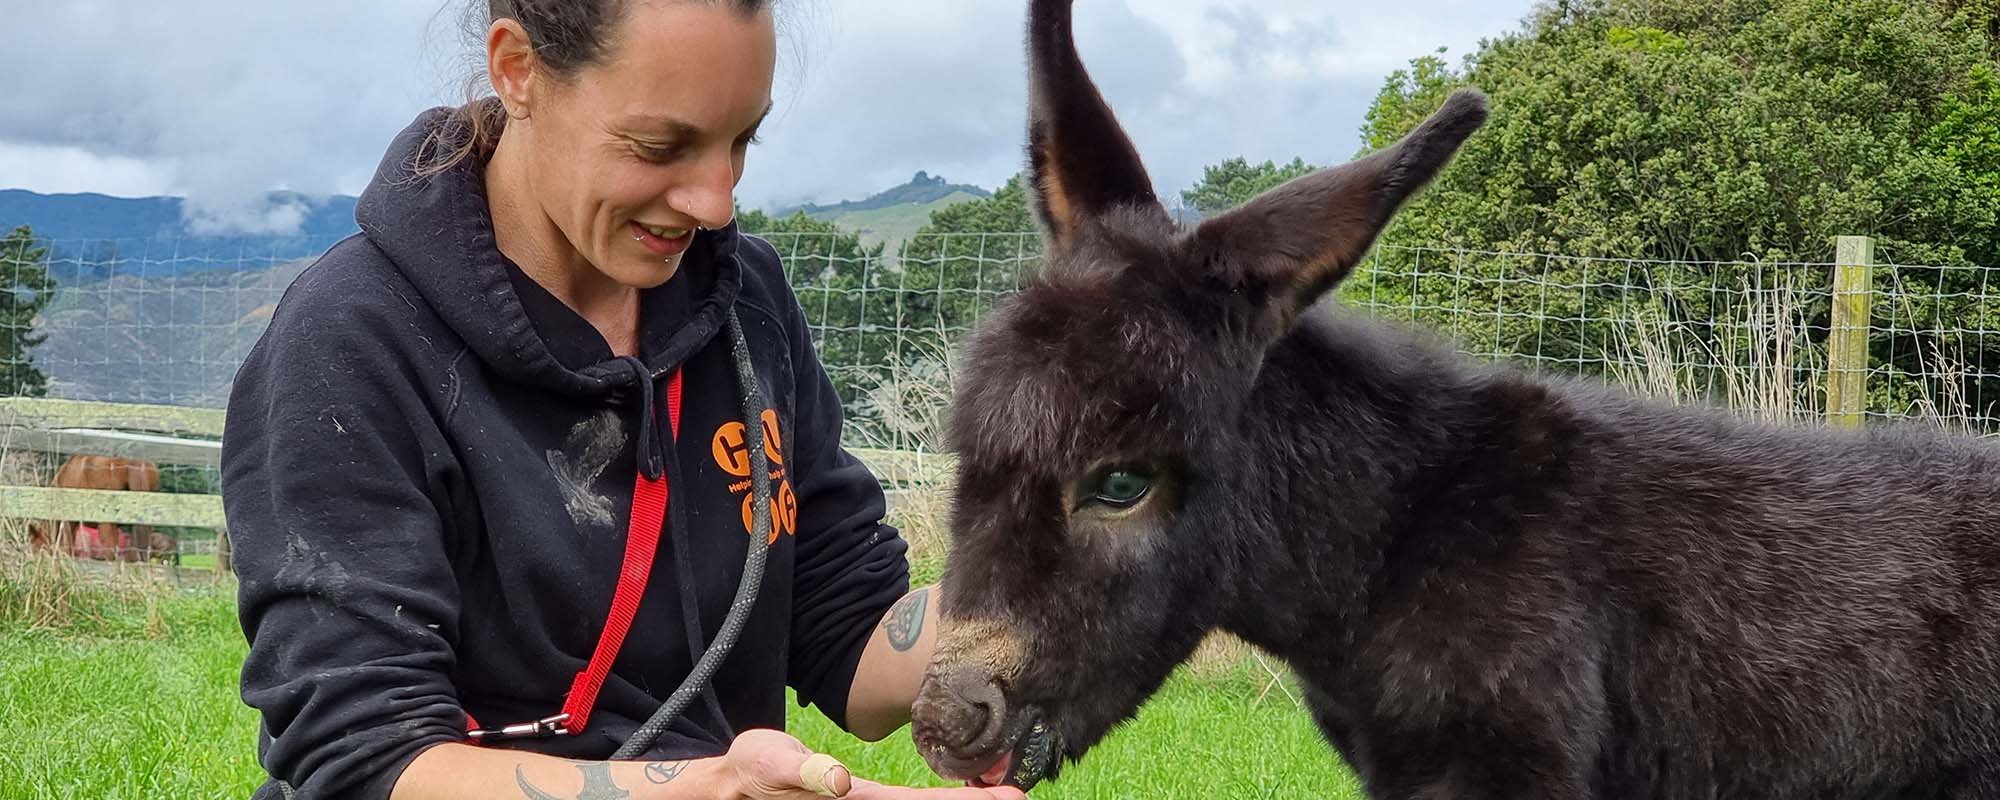  Huha team member in a navy blue hoodie feeding a dark brown donkey from her hand while sitting in a vibrant green paddock